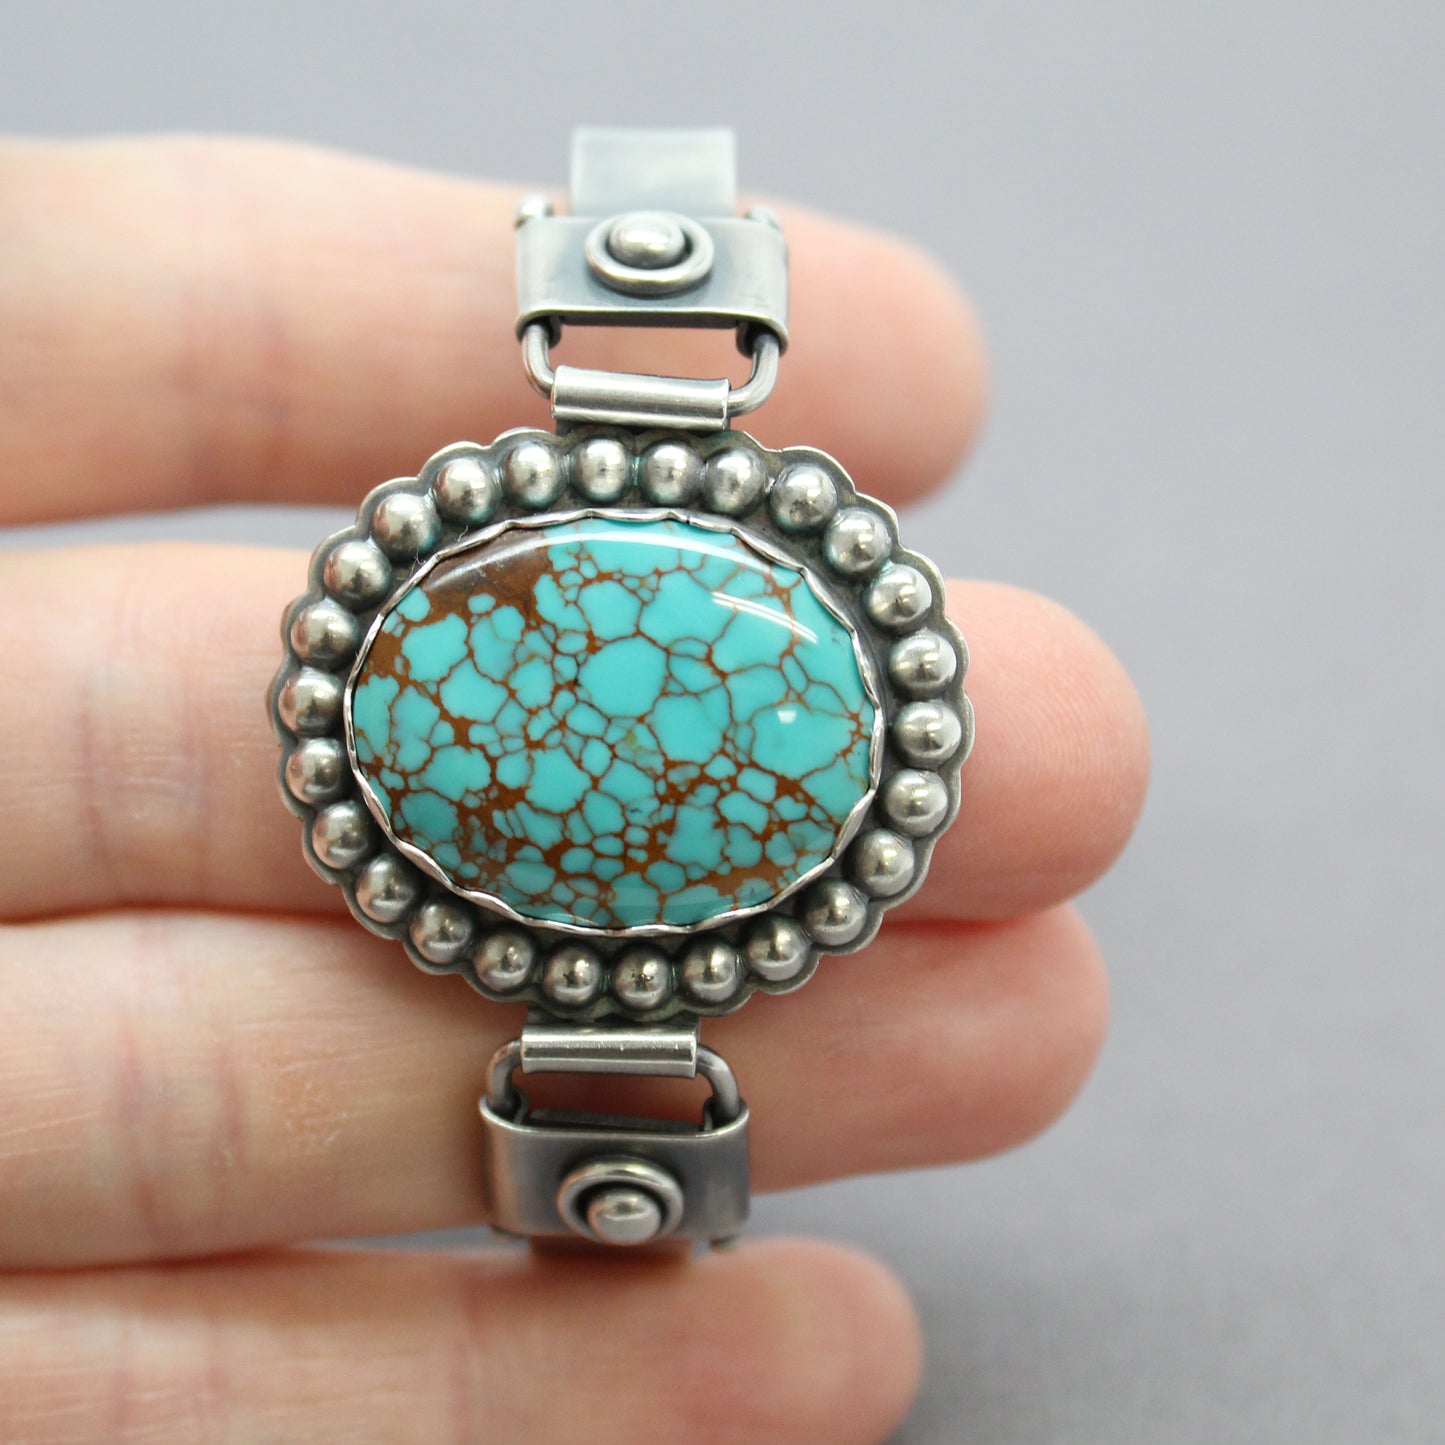 Pilot Mountain Turquoise Bracelet in Sterling Silver